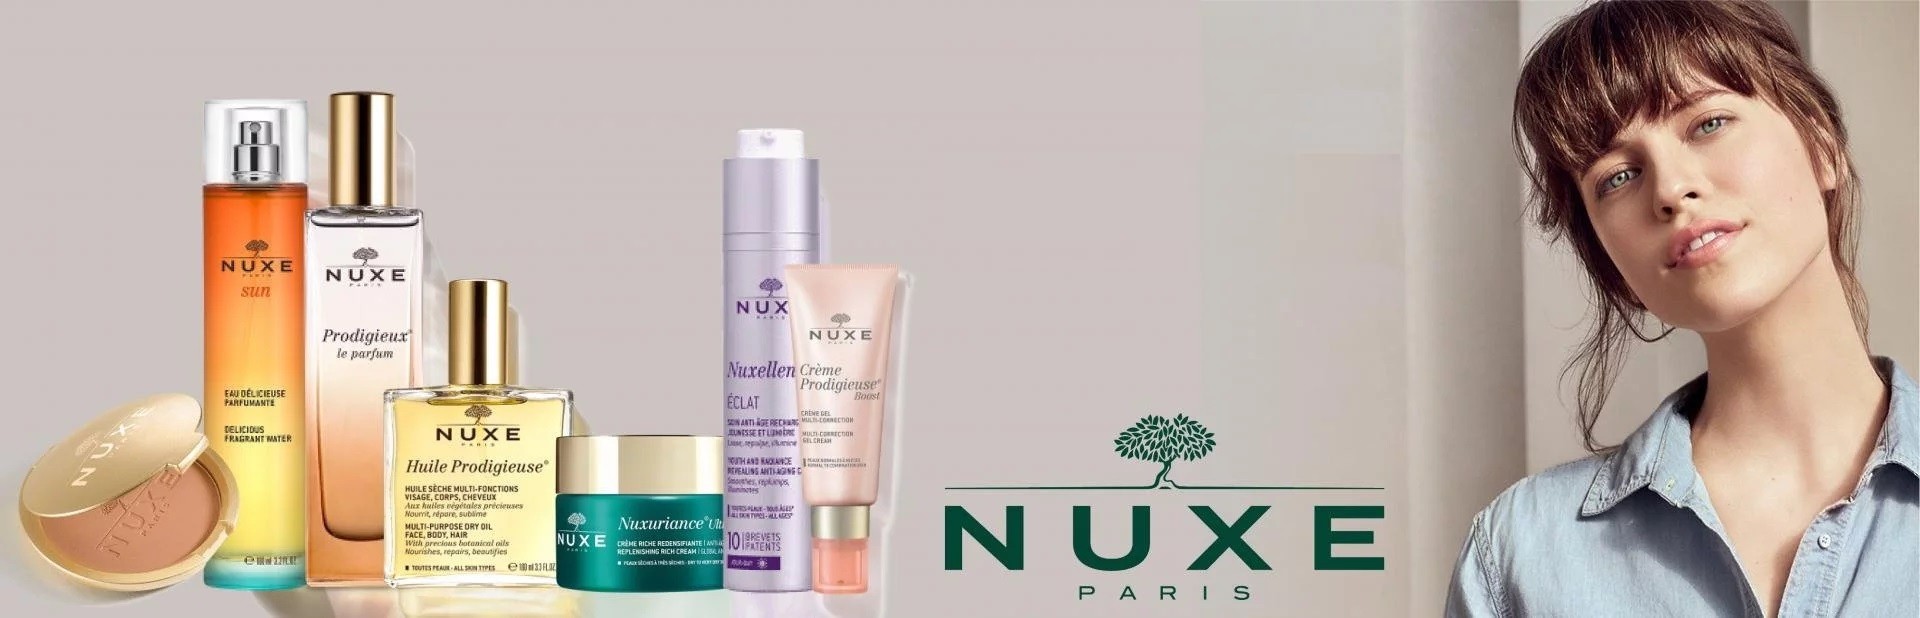 nuxe dermo cosmetics and skin carefor women